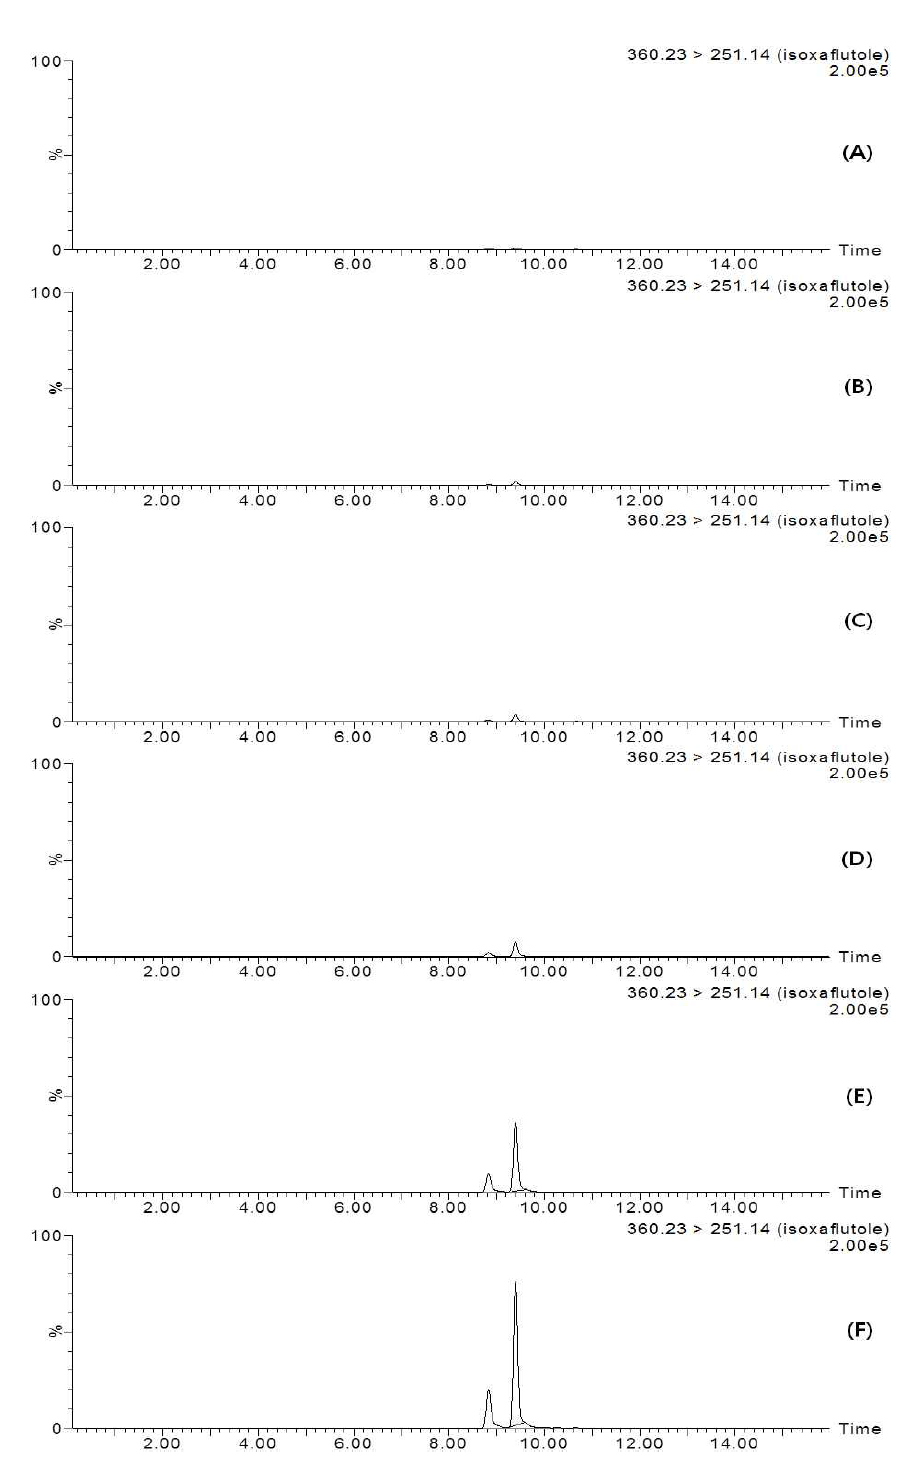 LC-MS/MS chromatograms of isoxaflutole standard in mandarin matrix (A) 0.02 mg/kg, (B) 0.05 mg/kg, (C) 0.1 mg/kg, (D) 0.2 mg/kg, (E) 1 mg/kg, and (F) 2 mg/kg